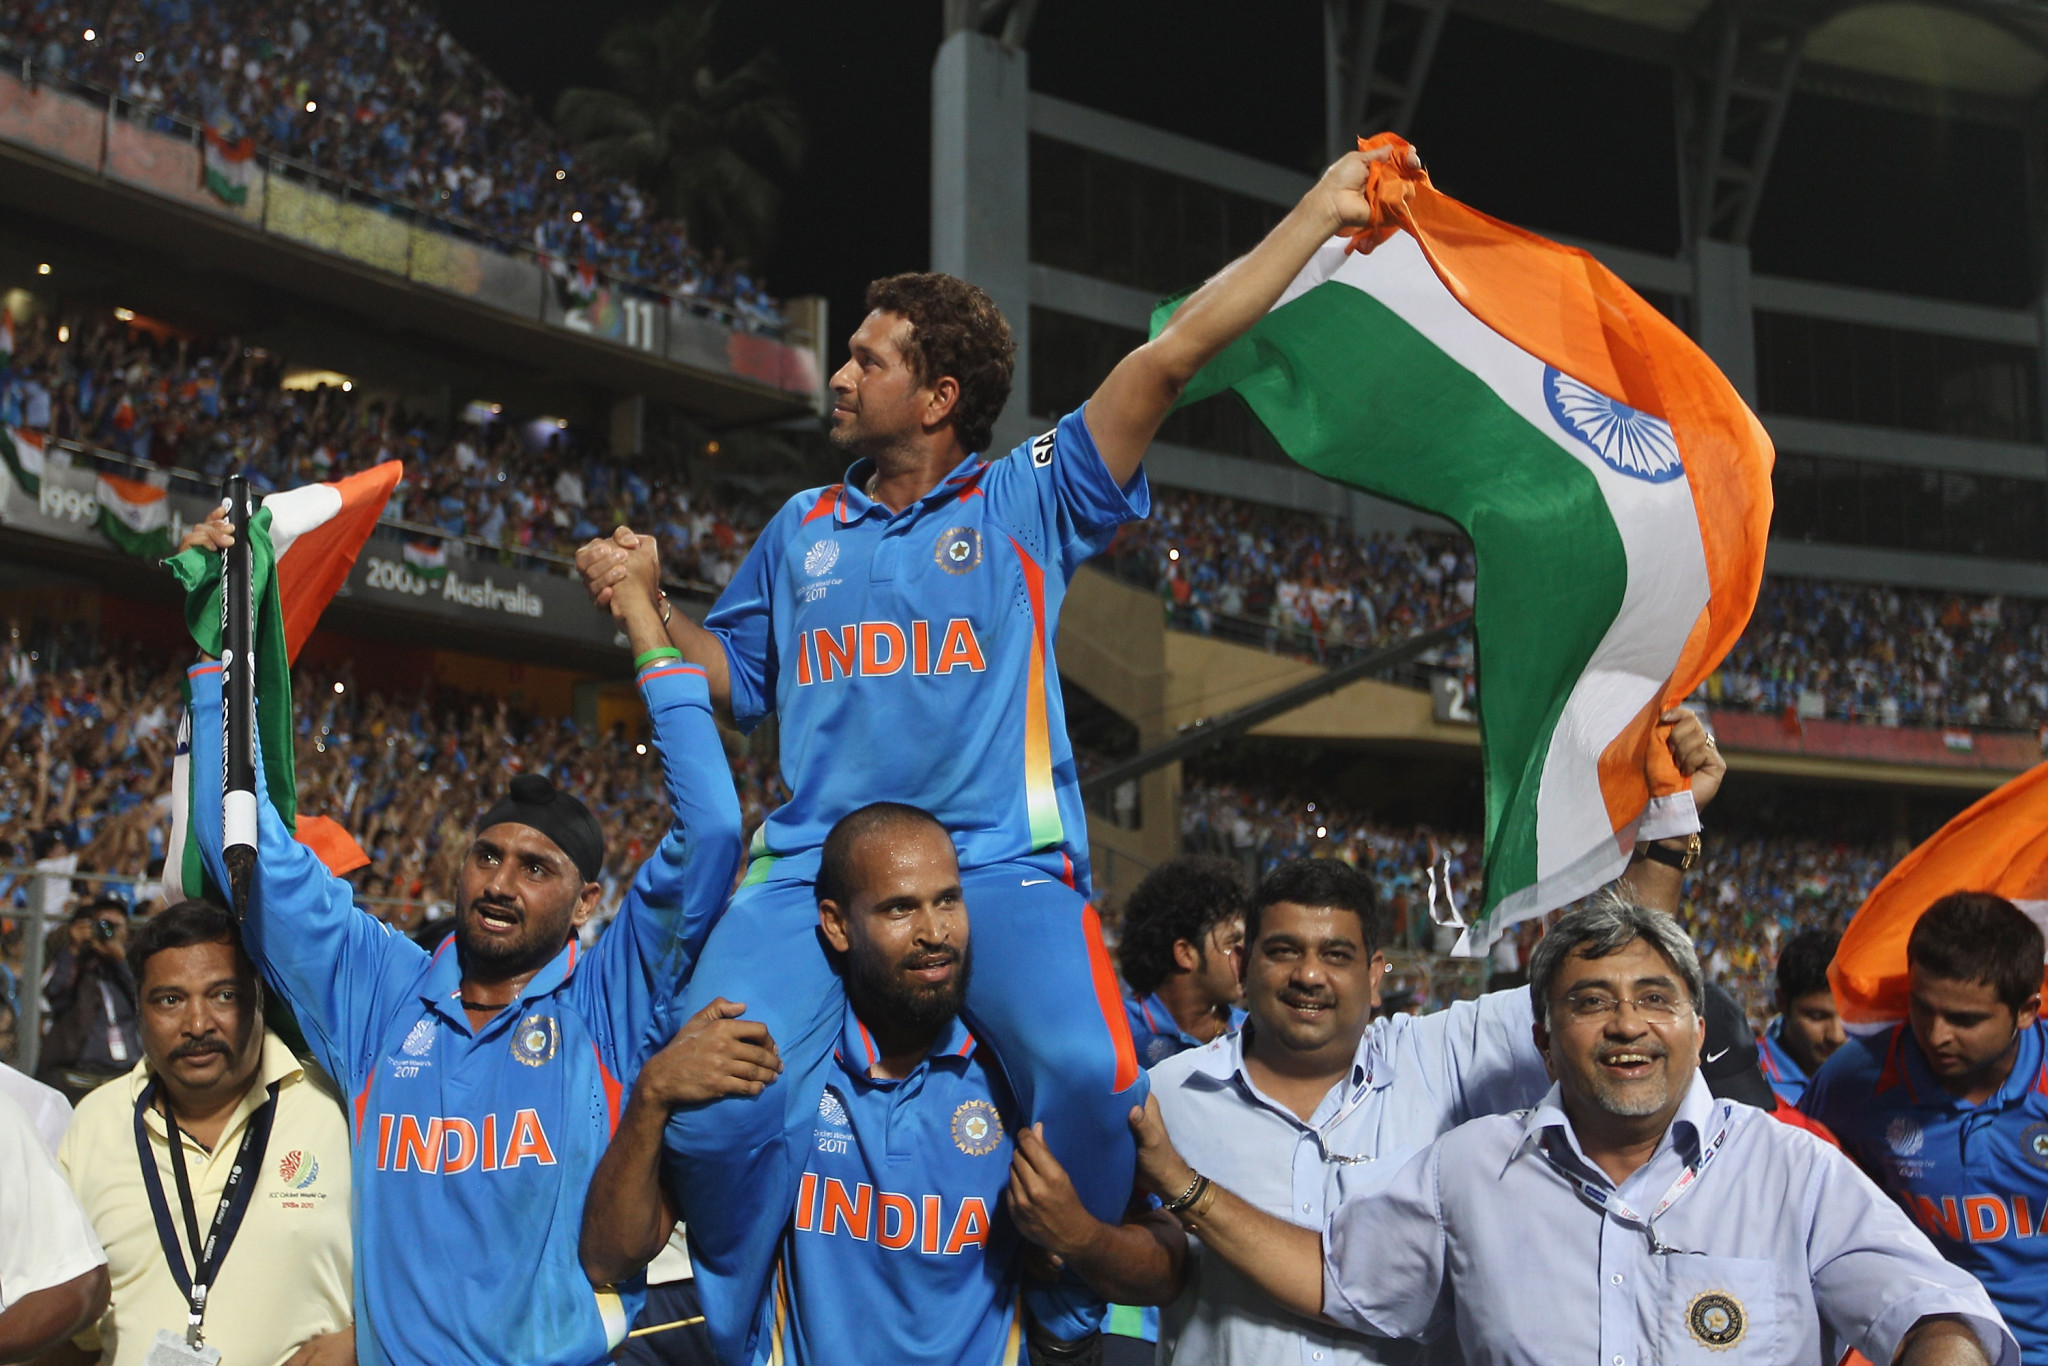 Sachin Tendulkar was part of the last Indian team to lift the World Cup trophy in 2011 ©Getty Images